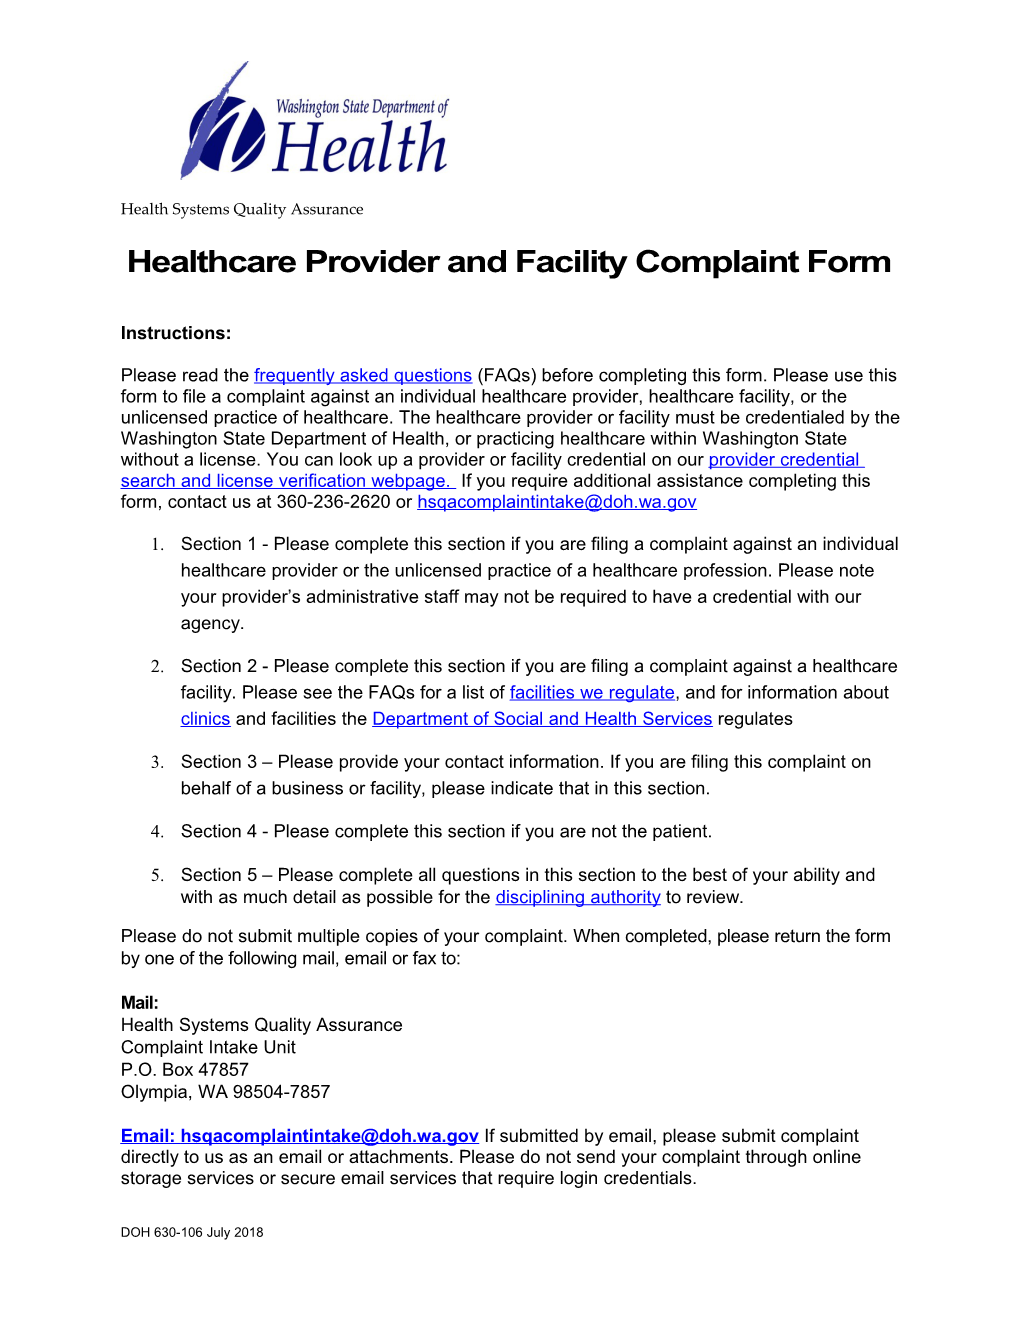 Healthcare Provider and Facility Complaint Form